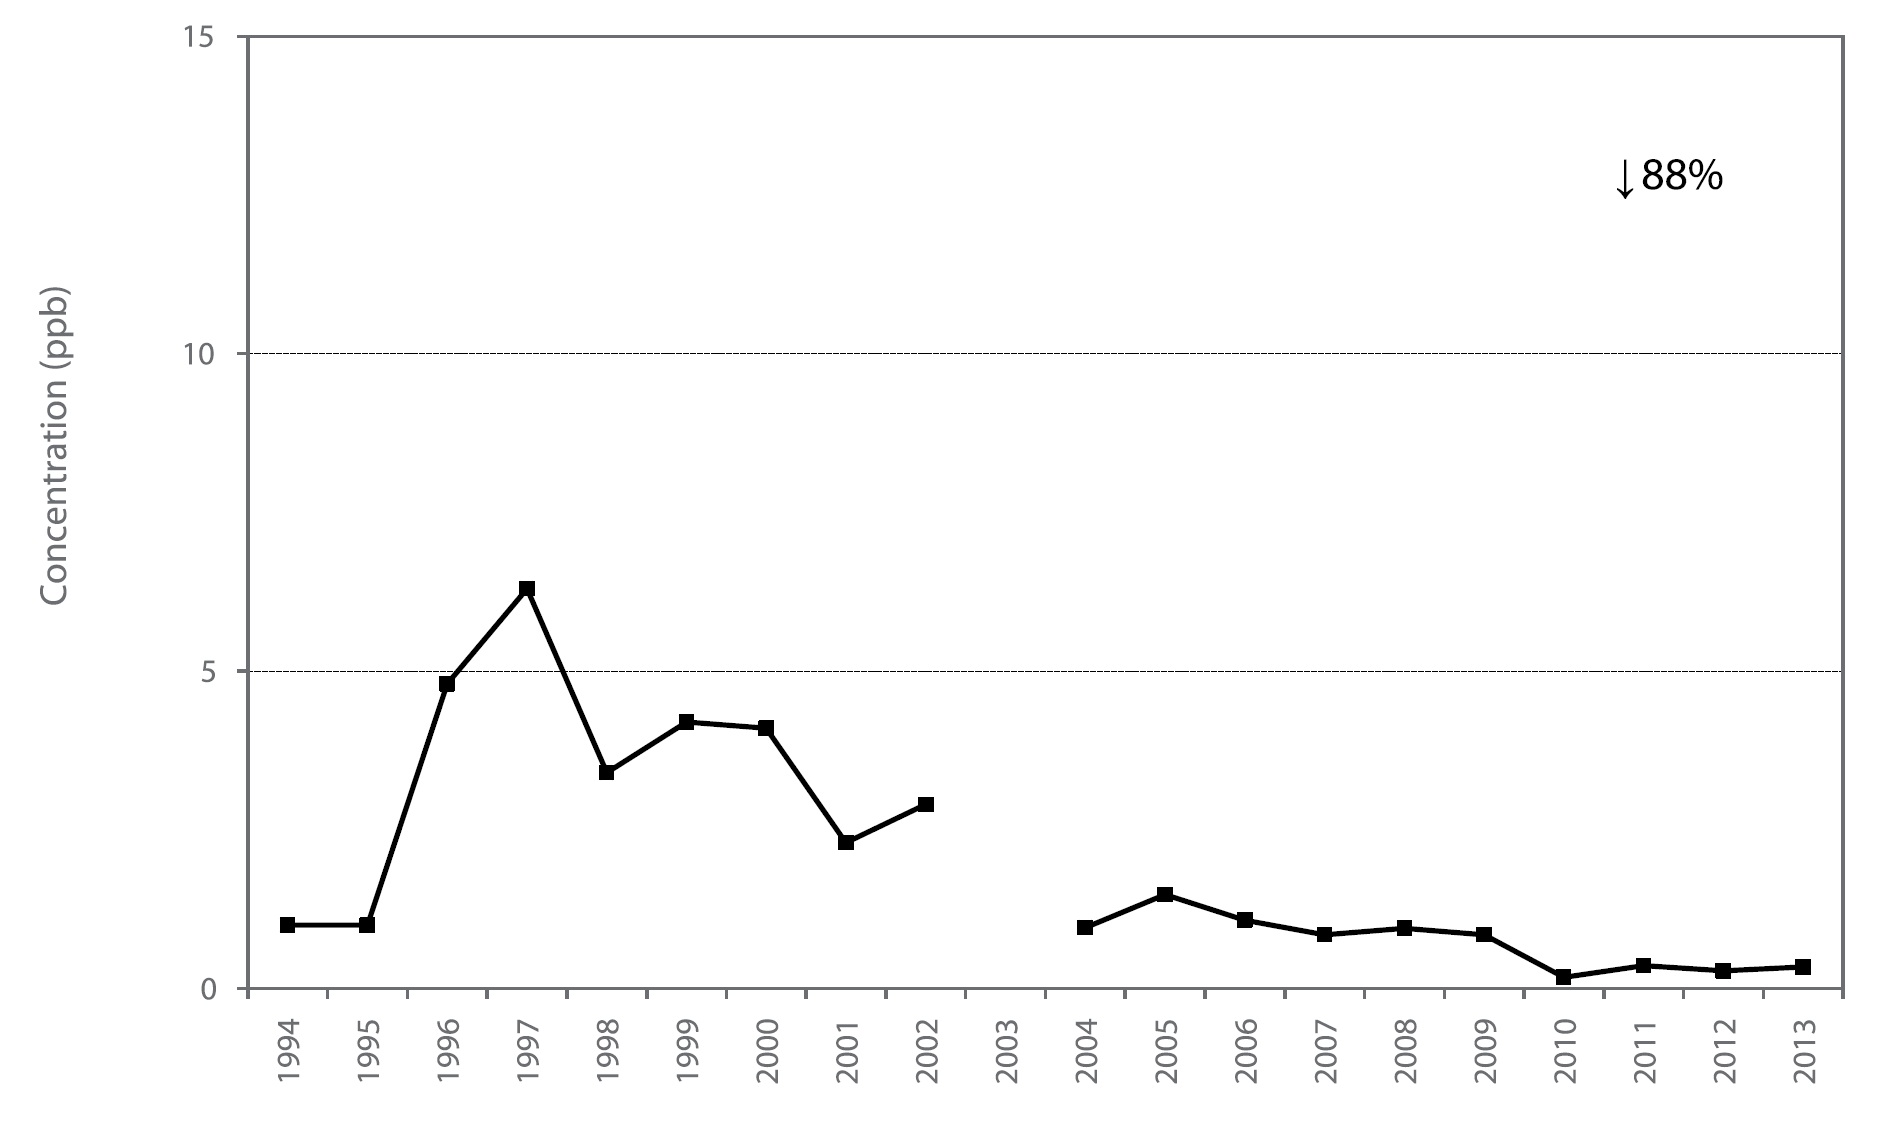 Figure A46 is a line chart displaying the sulphur dioxide annual mean at Ottawa Downtown from 1994 to 2013. Over this 20-year period, sulphur dioxide decreased 88%.